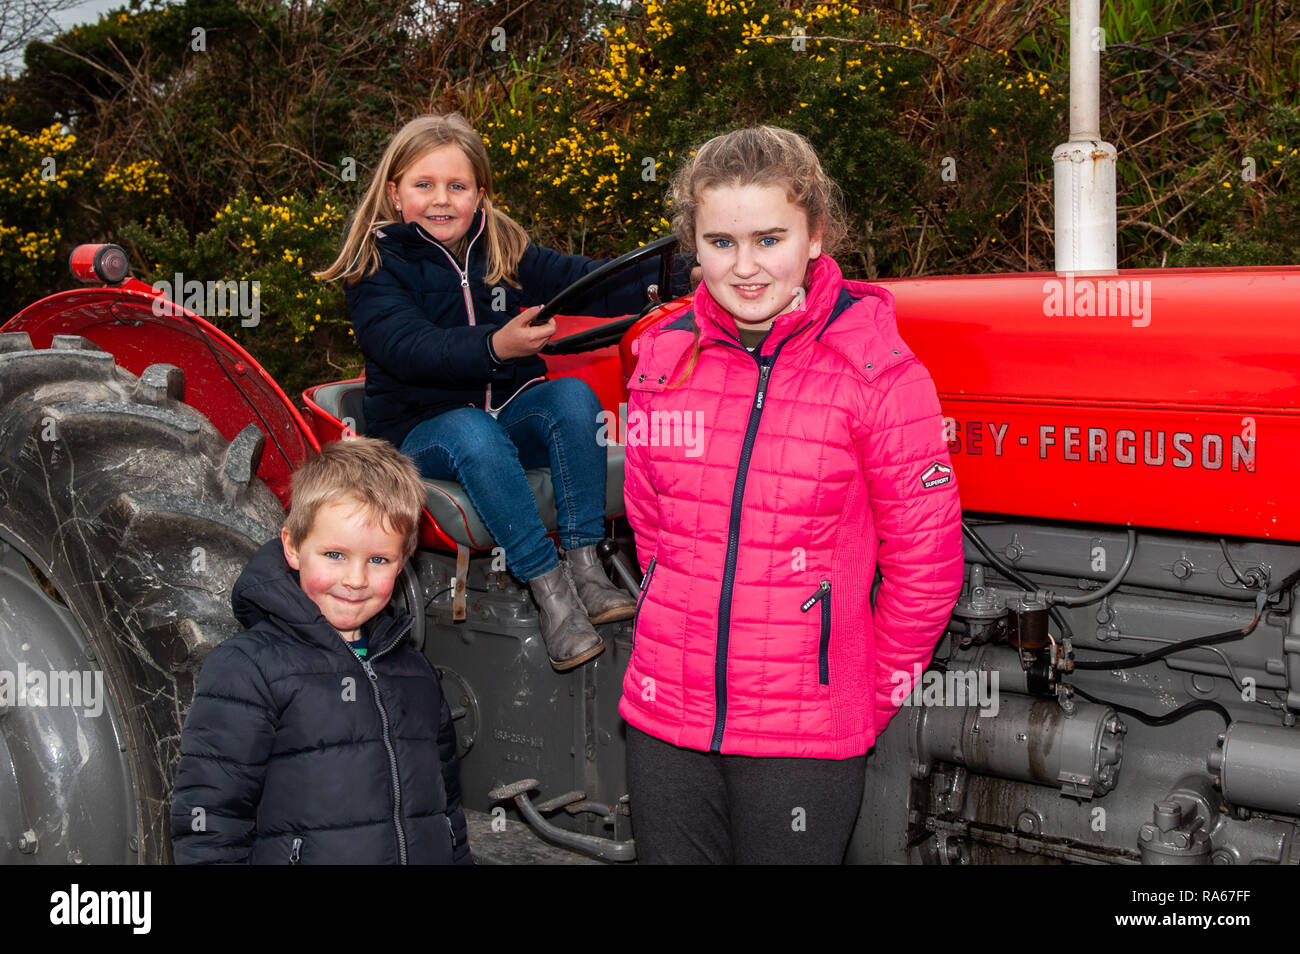 Glandore, West Cork, Ireland. 1st Jan, 2019. Leap and District Vintage Club held a New Year's Day tractor and car run in aid of the Glandore National School Building Fund earlier today. Over 60 tractors and cars signed on for the run. At the tractor run were Odhran, Aéla and Kellianne French, all from Leap. Credit: Andy Gibson/Alamy Live News. Stock Photo